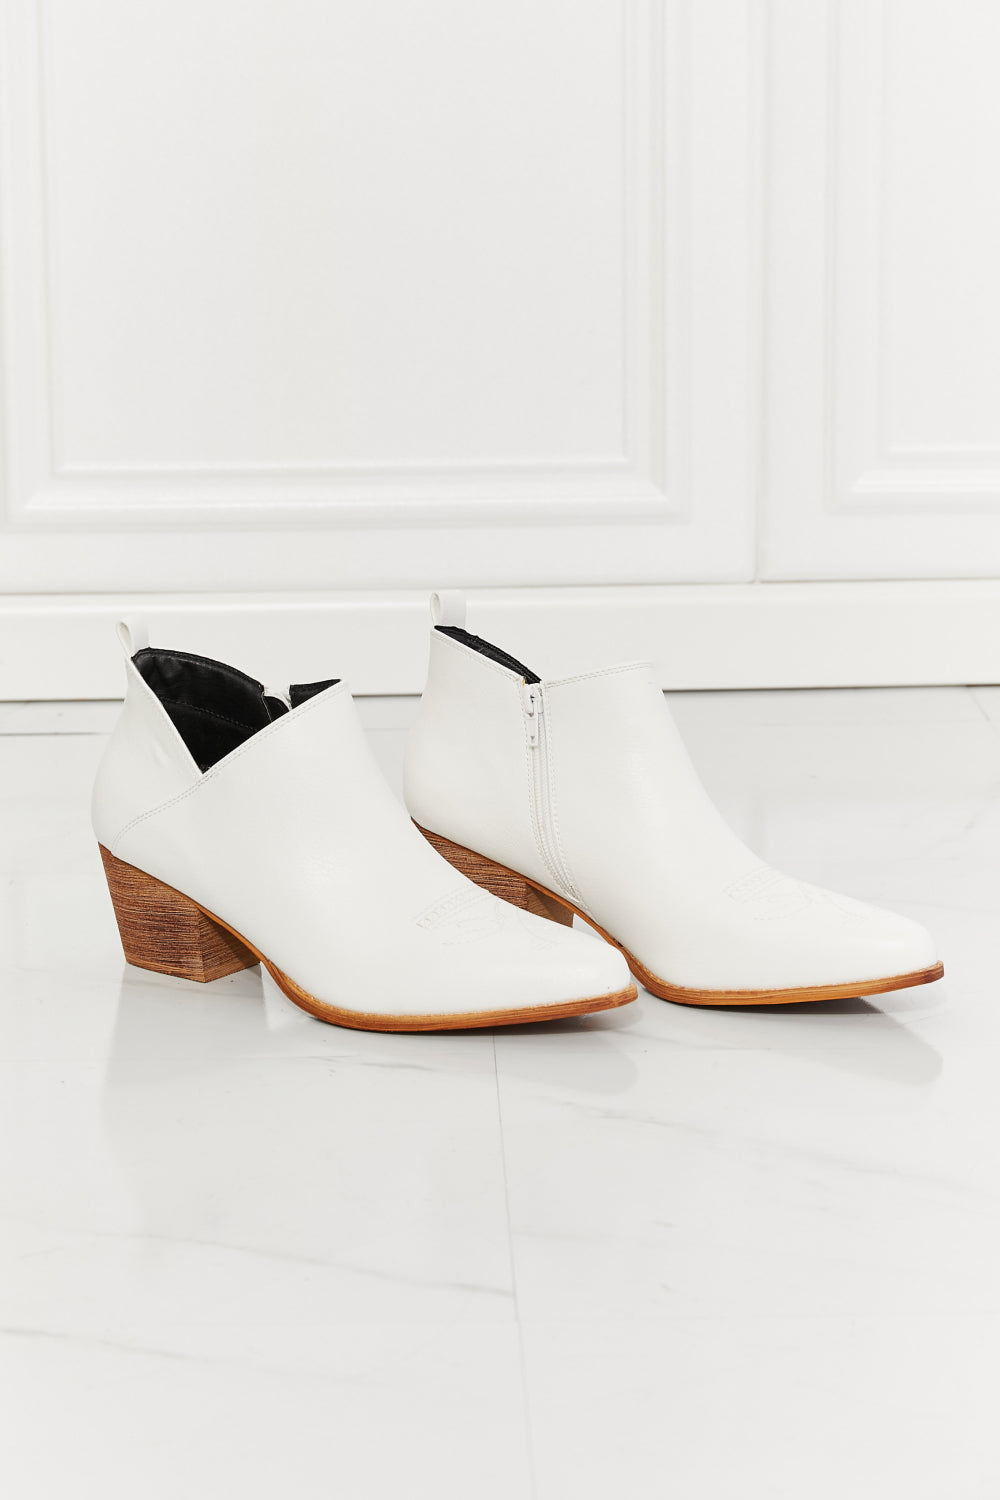 Trust Yourself Embroidered Crossover Cowboy Bootie in White - Copper + Rose